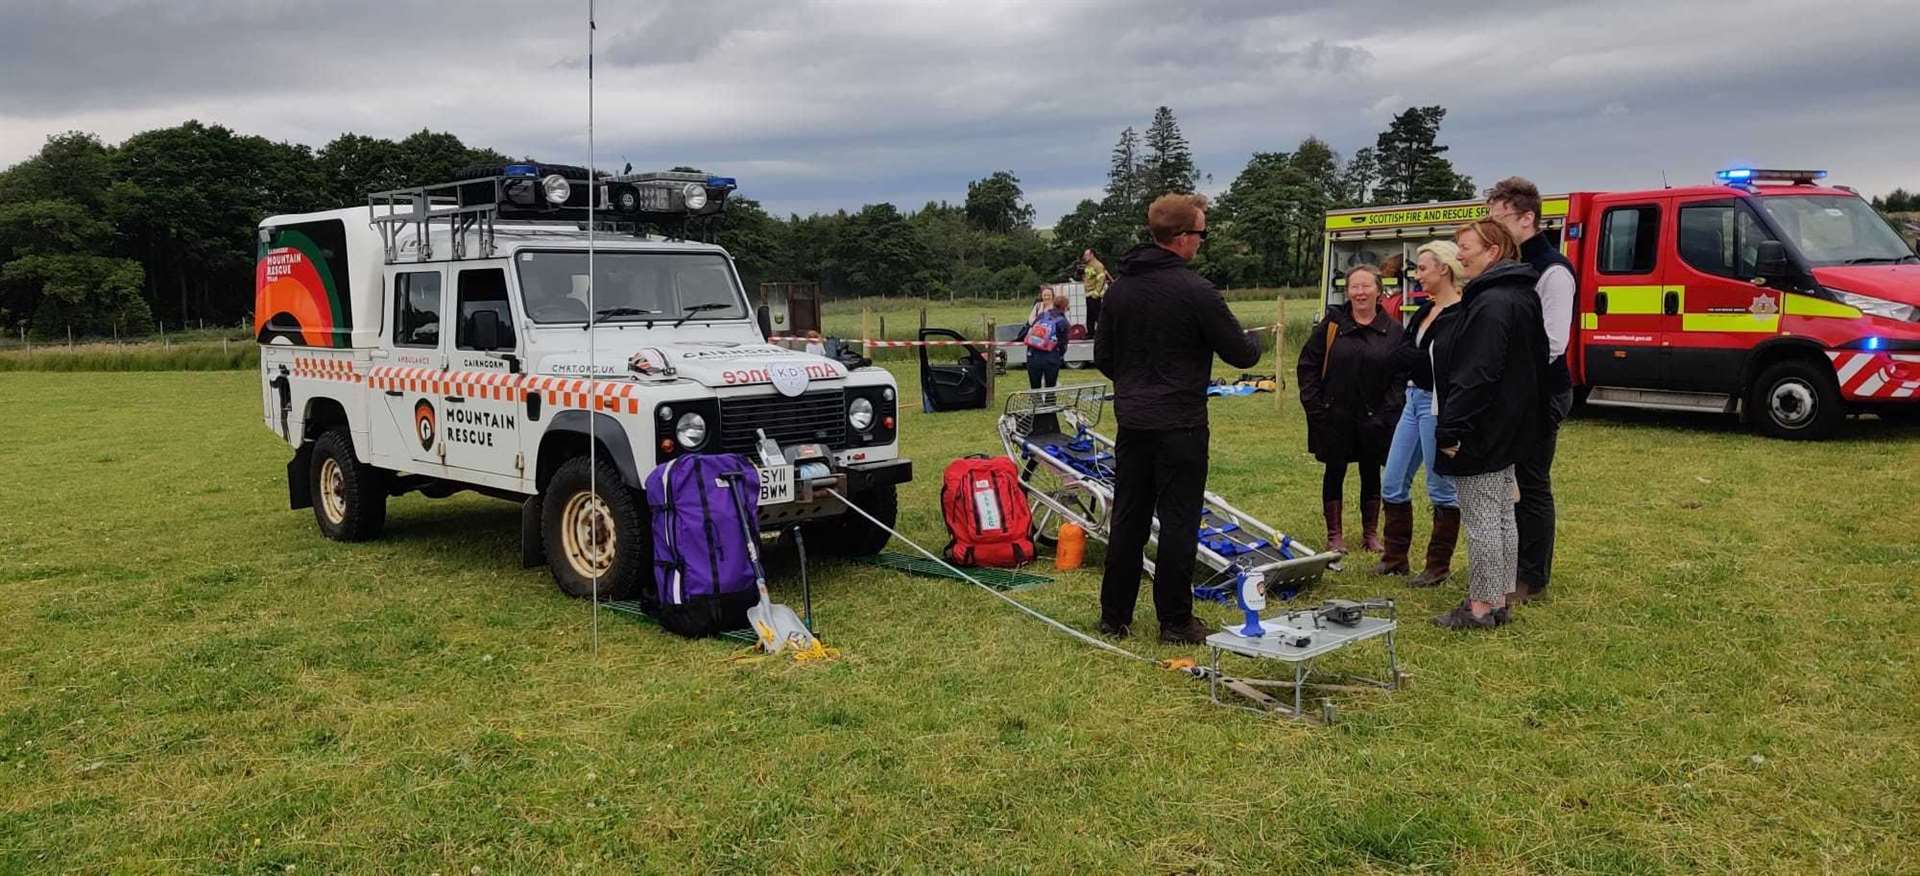 Display by the Cairngorm Mountain Rescue Team.